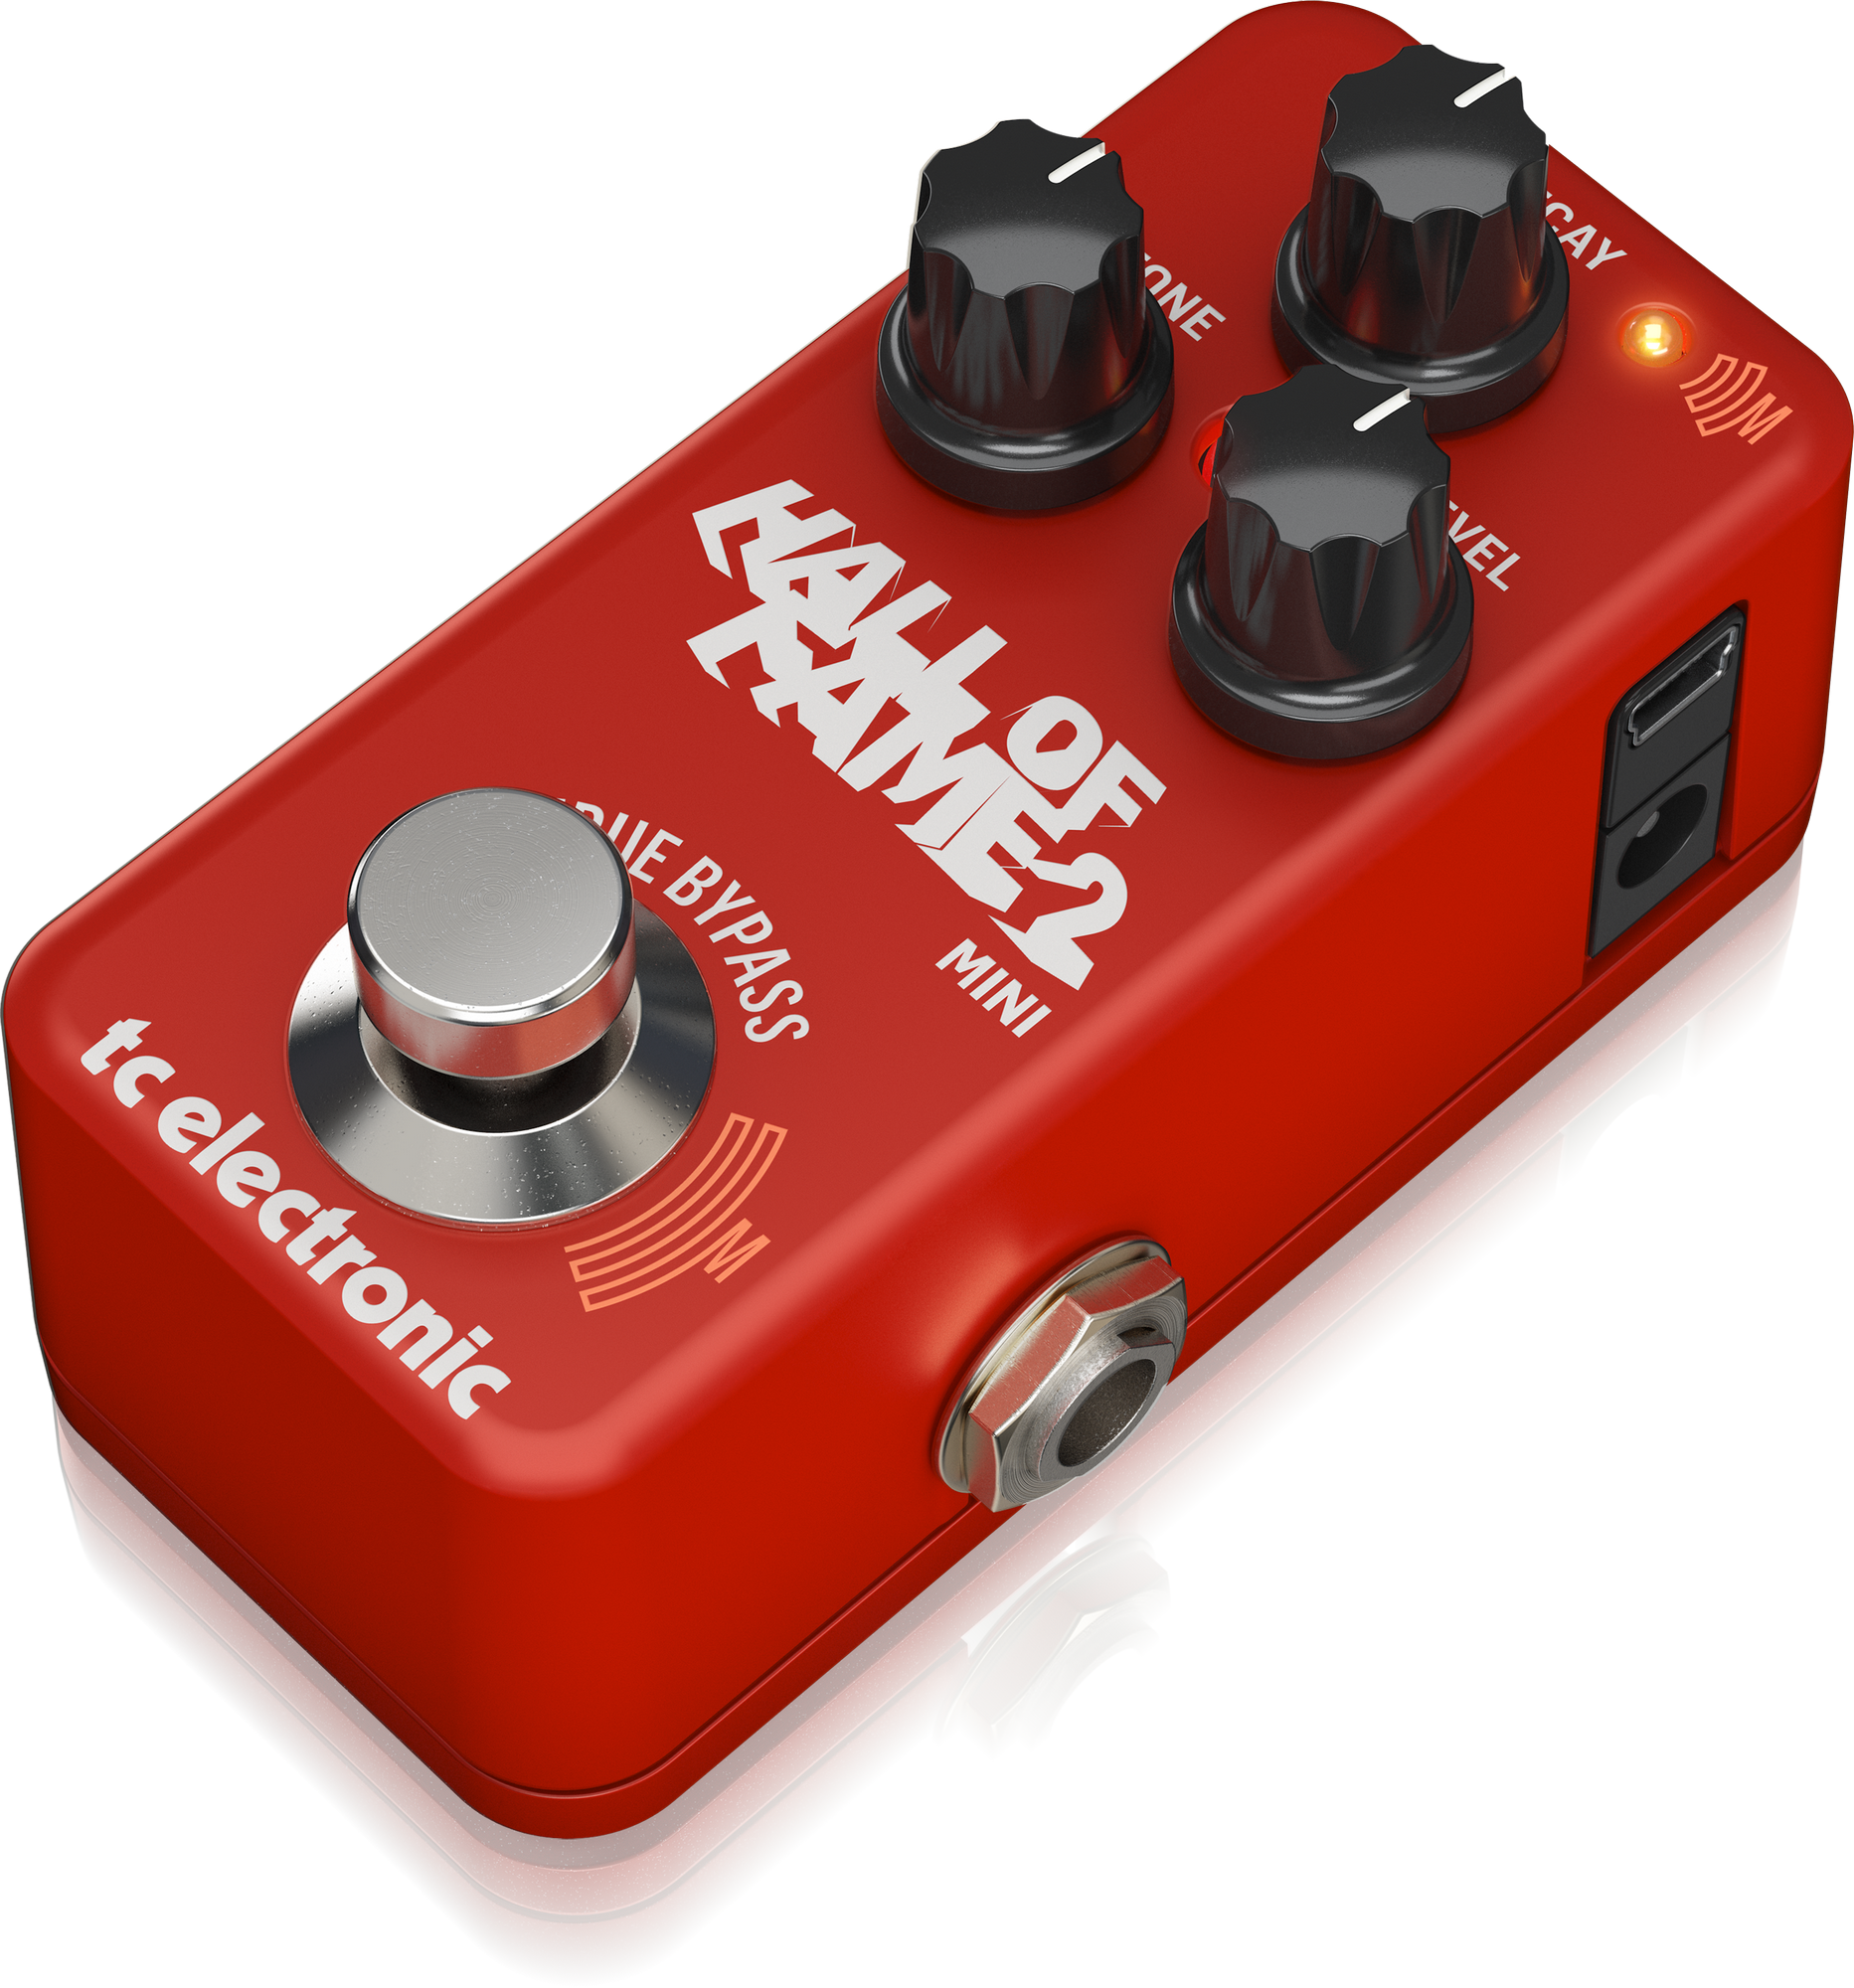 TC Electronic Hall of Fame 2 Mini Reverb Iconic Ultra-Compact Reverb Pedal with Groundbreaking MASH Footswitch and New Shimmer Reverb Algorithm, TC ELECTRONIC, EFFECTS, tc-electronic-effects-tc-hall-of-fame-2-mini-reverb, ZOSO MUSIC SDN BHD